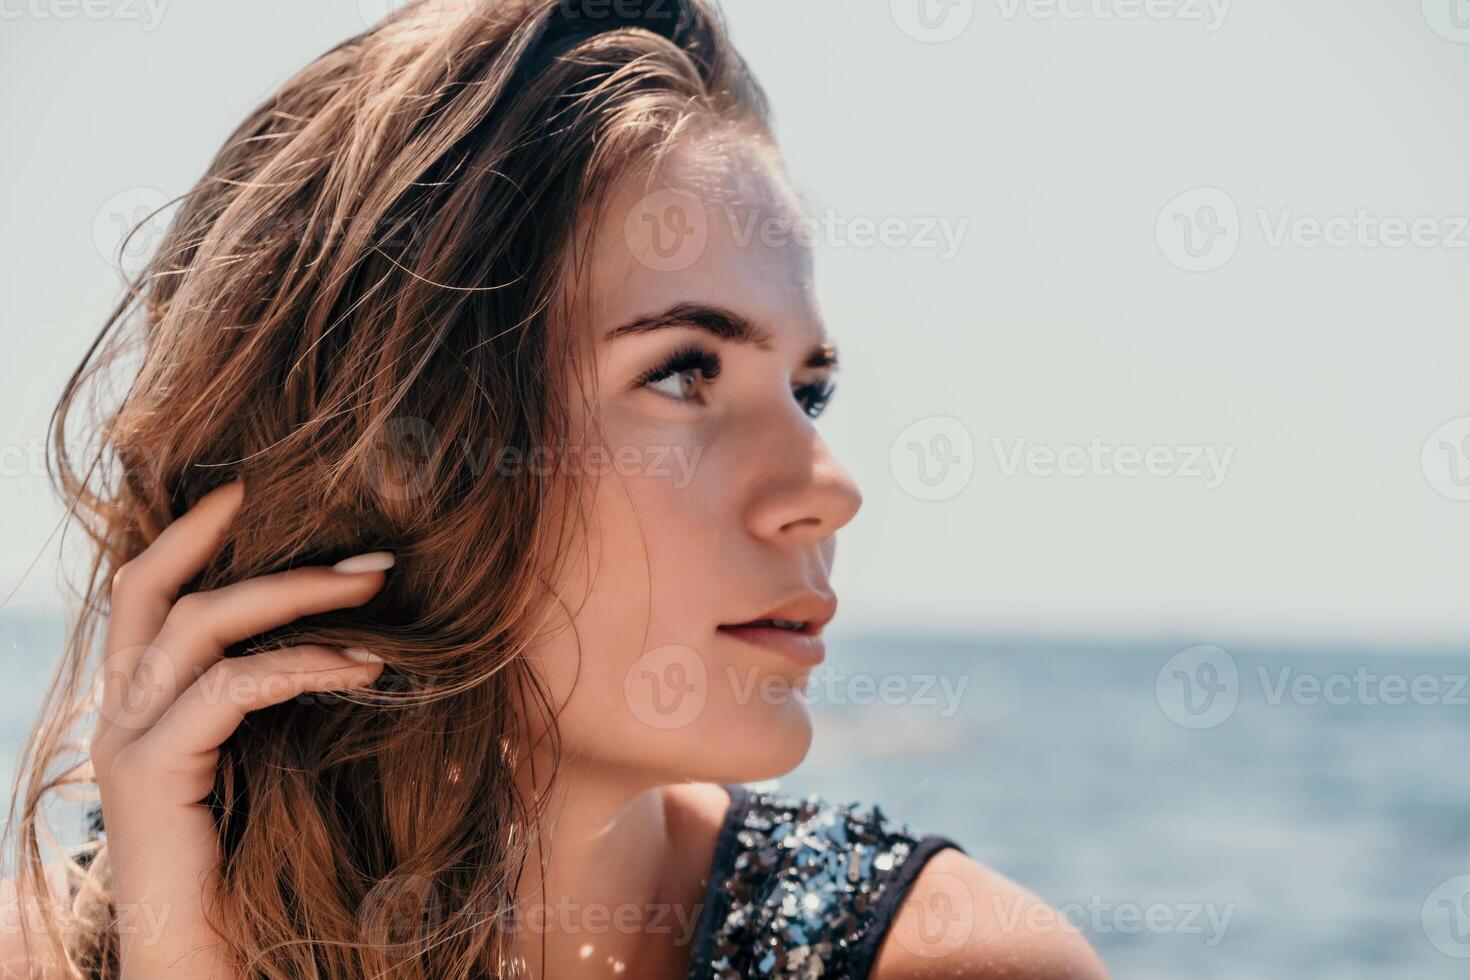 Woman summer travel sea. Happy tourist enjoy taking picture outdoors for memories. Woman traveler posing on the beach at sea surrounded by volcanic mountains, sharing travel adventure journey photo